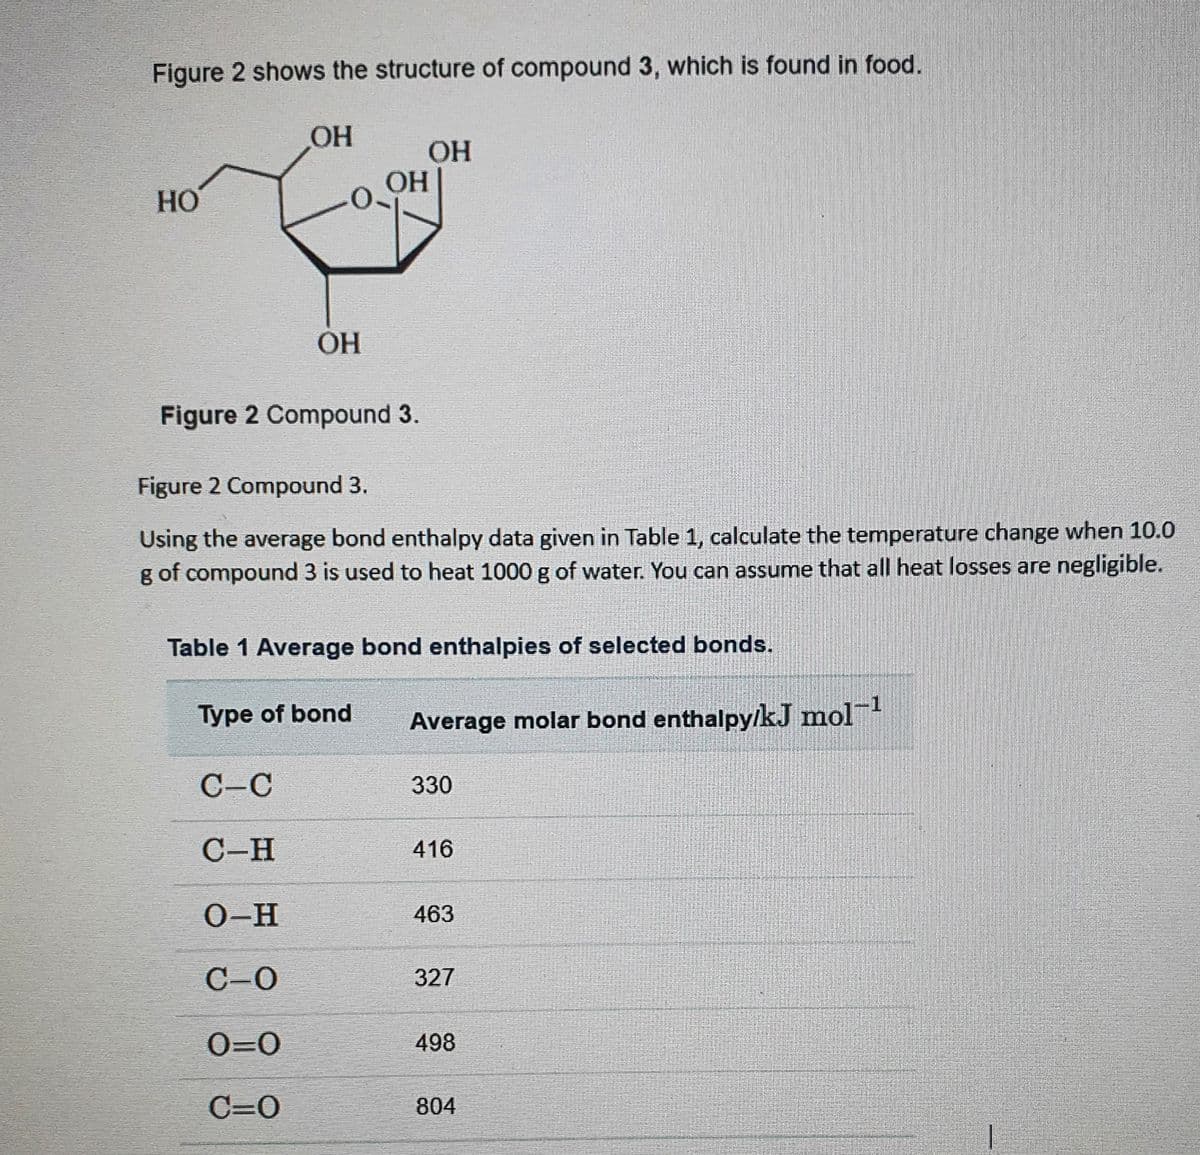 Figure 2 shows the structure of compound 3, which is found in food.
HO
OH
ОН
Figure 2 Compound 3.
C-C
C-H
O-H
C-0
0=0
C=O
OH
OH
Figure 2 Compound 3.
Using the average bond enthalpy data given in Table 1, calculate the temperature change when 10.0
g of compound 3 is used to heat 1000 g of water. You can assume that all heat losses are negligible.
Type of bond
Table 1 Average bond enthalpies of selected bonds.
Average molar bond enthalpy/kJ mol-¹
330
416
463
327
498
804